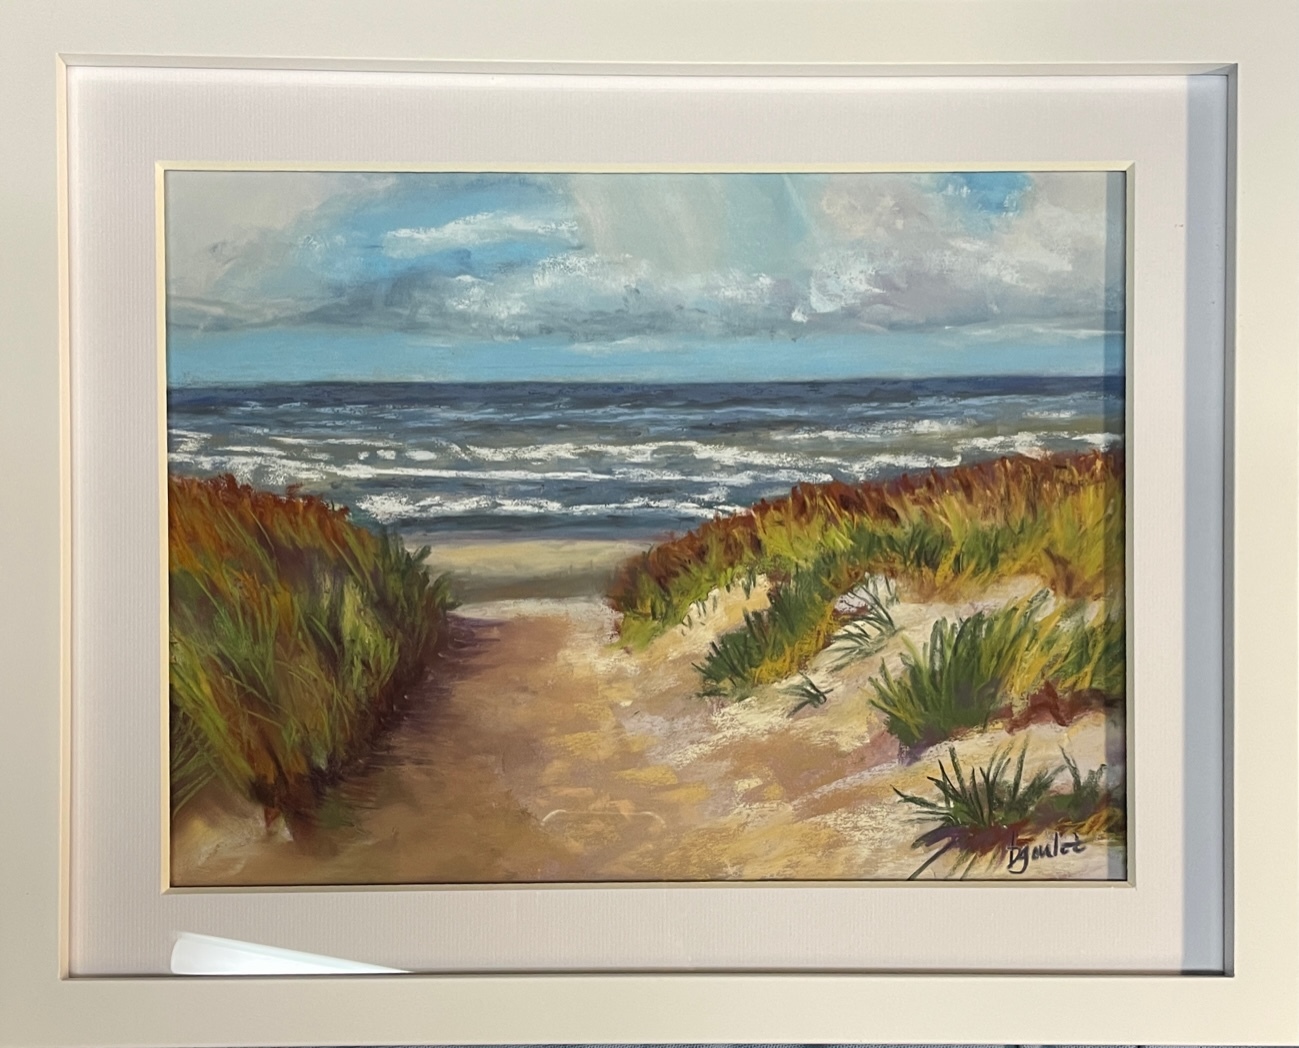 Dune pastel painting of sand, grass, and seashore by Beth Goulet